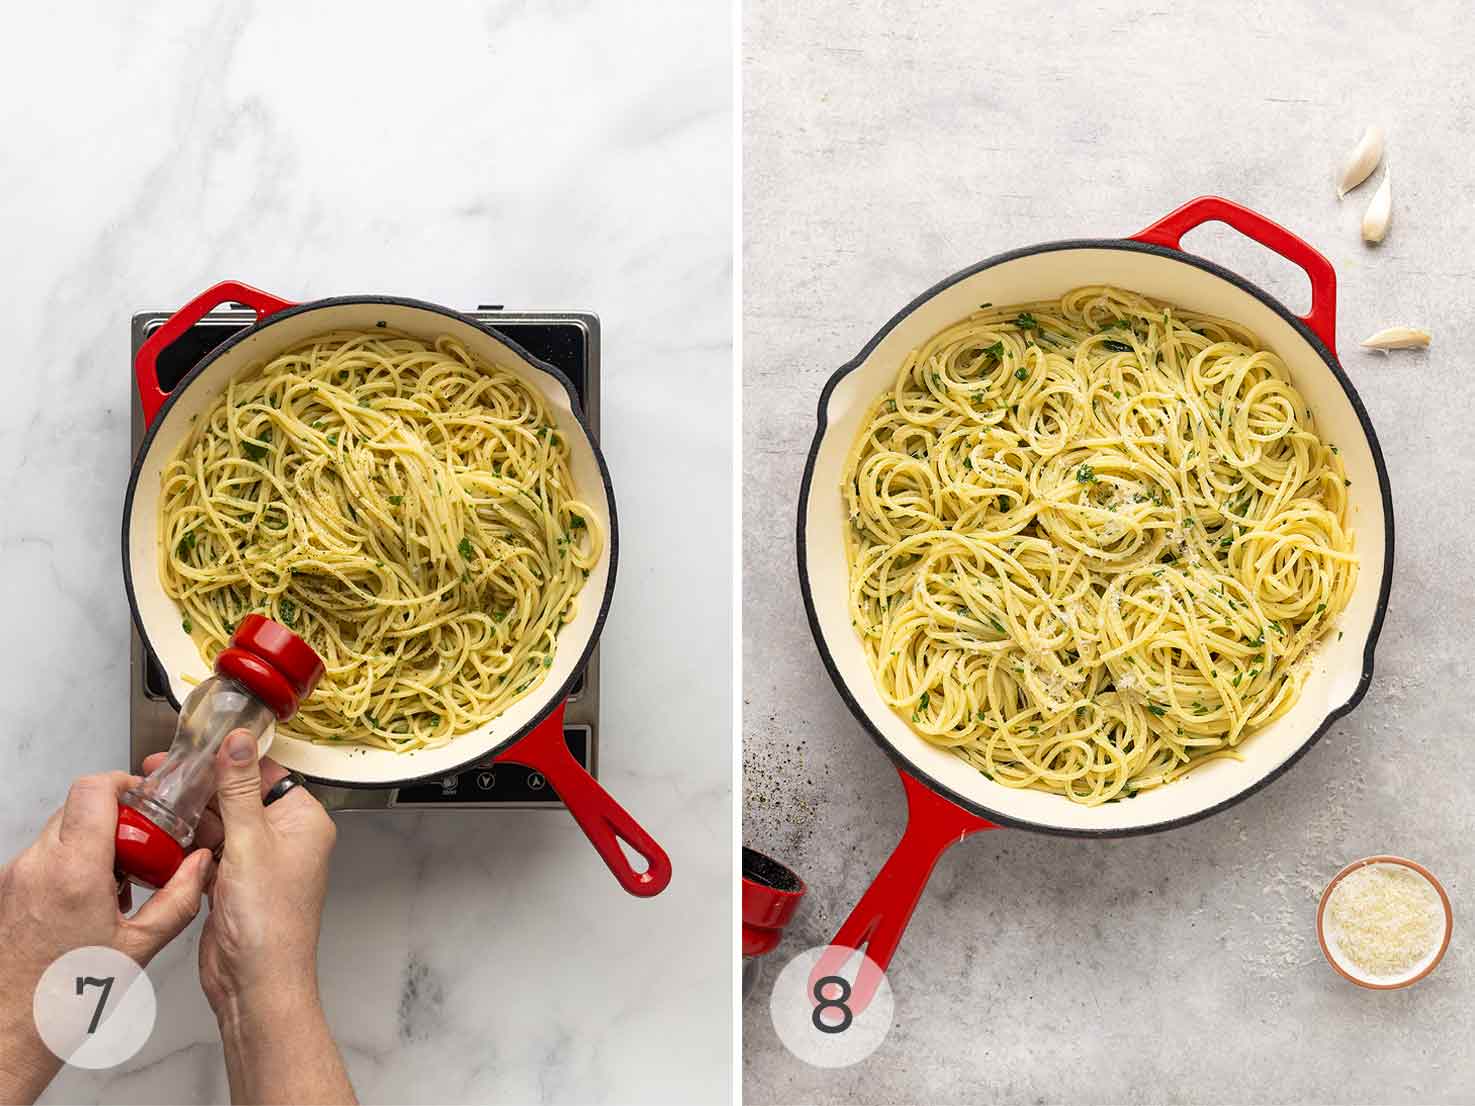 A person seasoning a skillet of pasta with pepper, and a finished skillet of pasta with Parmesan on the side.